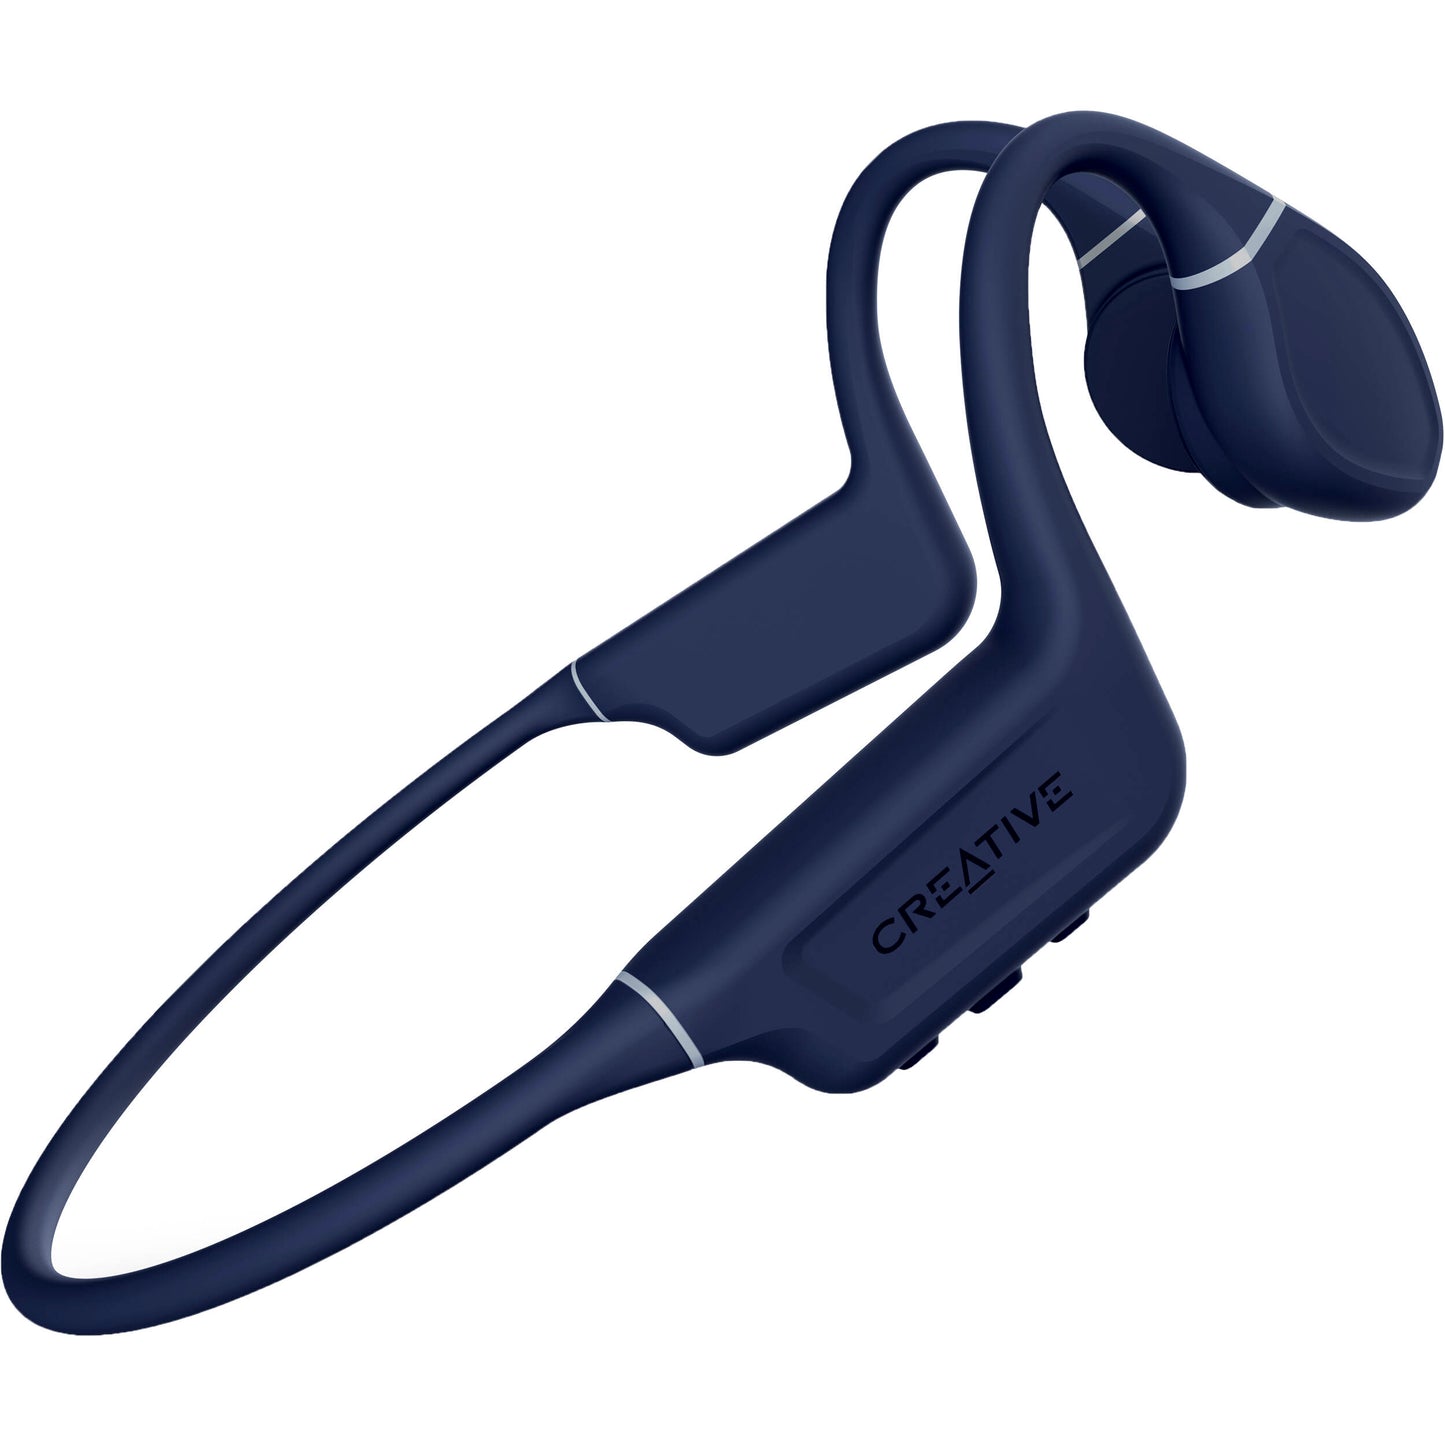 Creative Labs Creative Outlier Free Pro Headset Wireless Neck-band Calls/Music/Sport/Everyday Bluetooth Blue